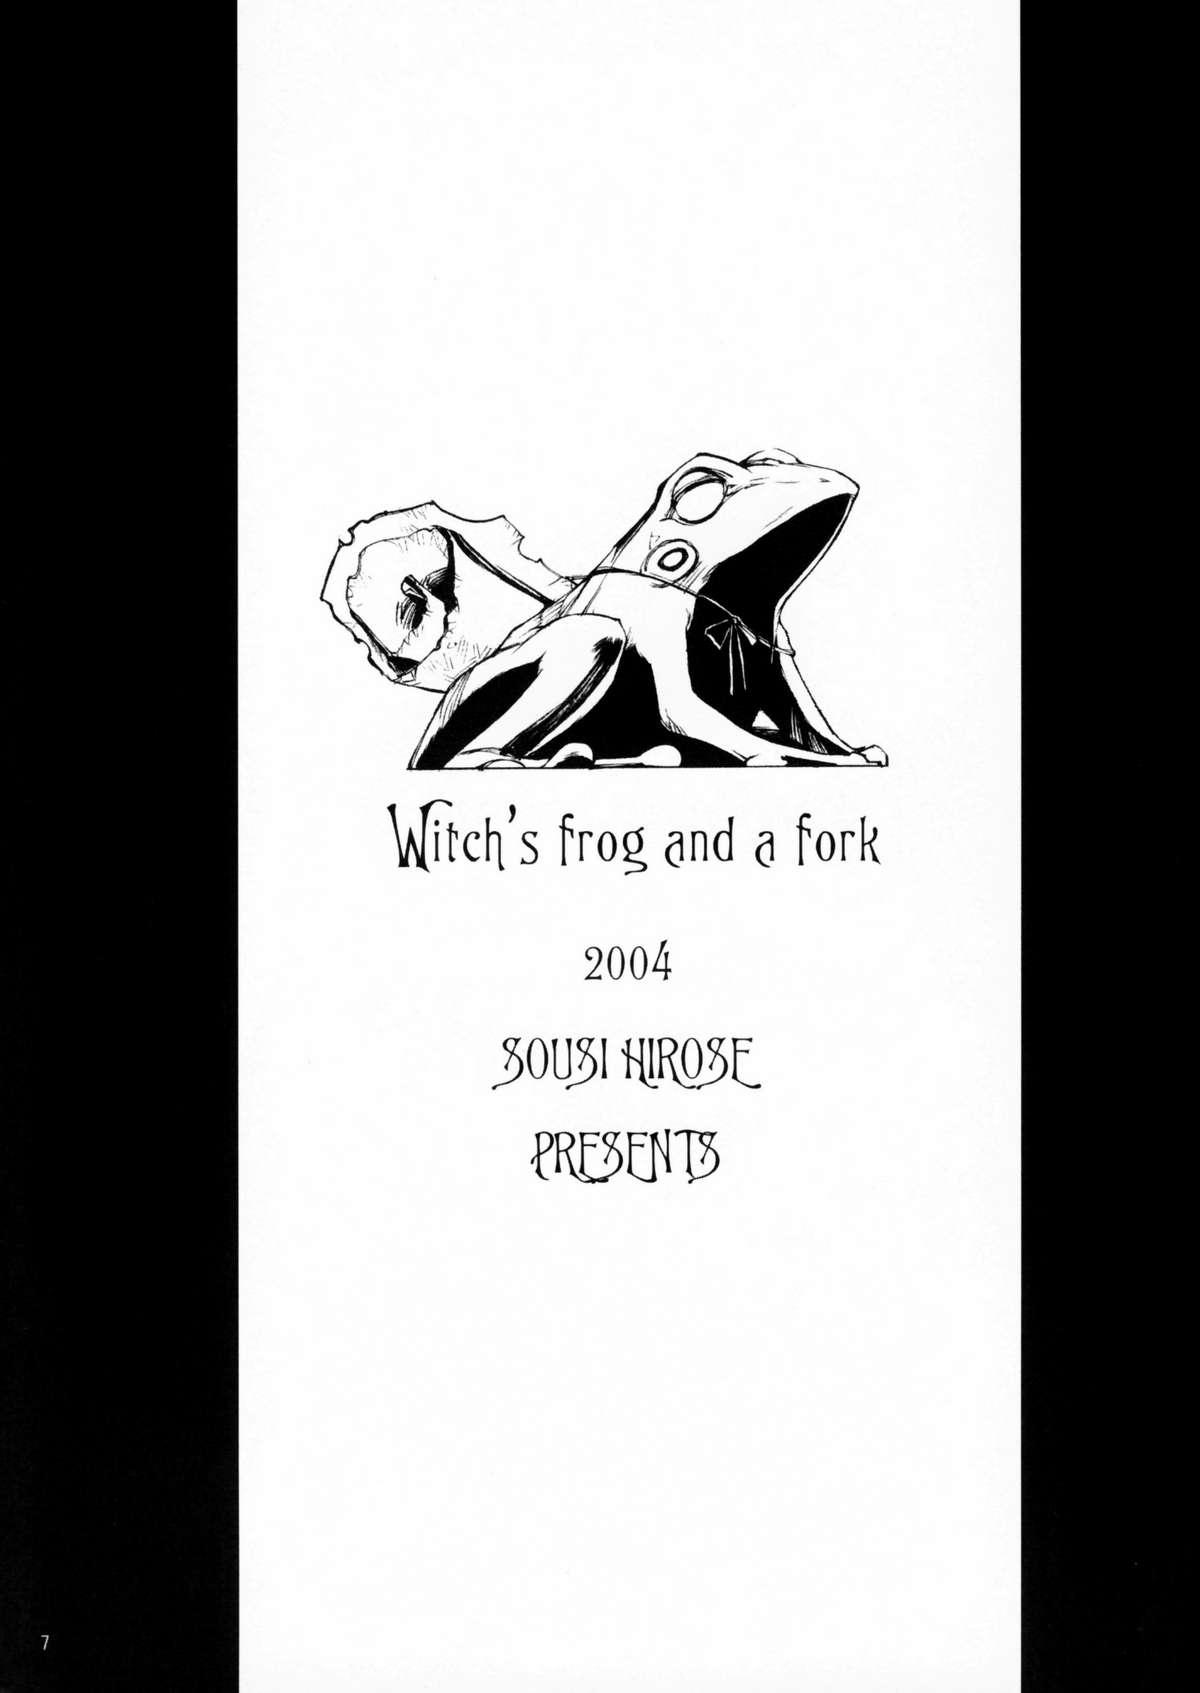 Witch's frog and a fork 5